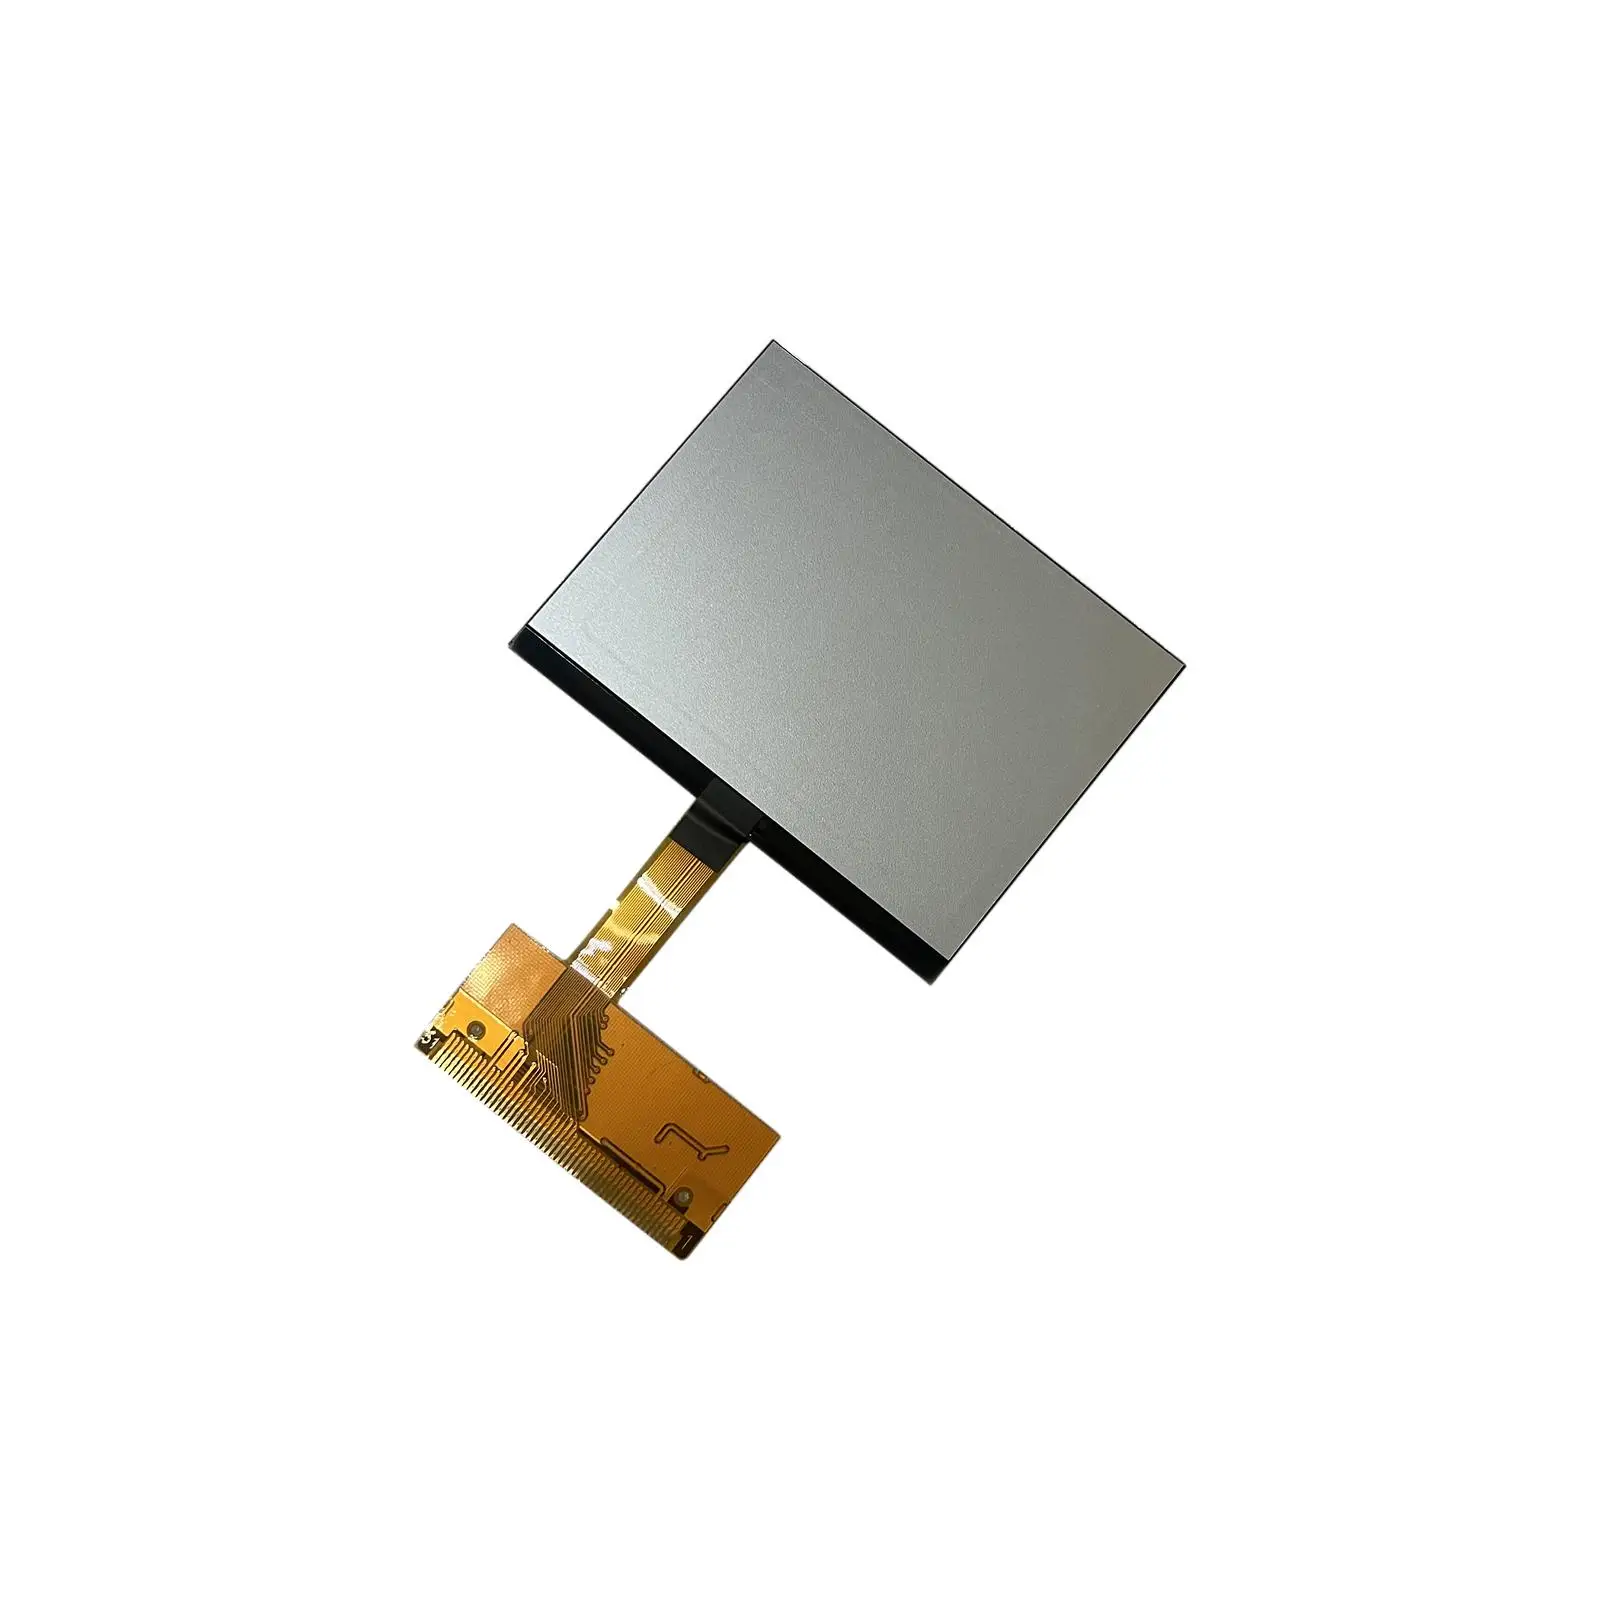 LCD Display Screen Replacements Spare Parts Professional for A3 A4 Pixel